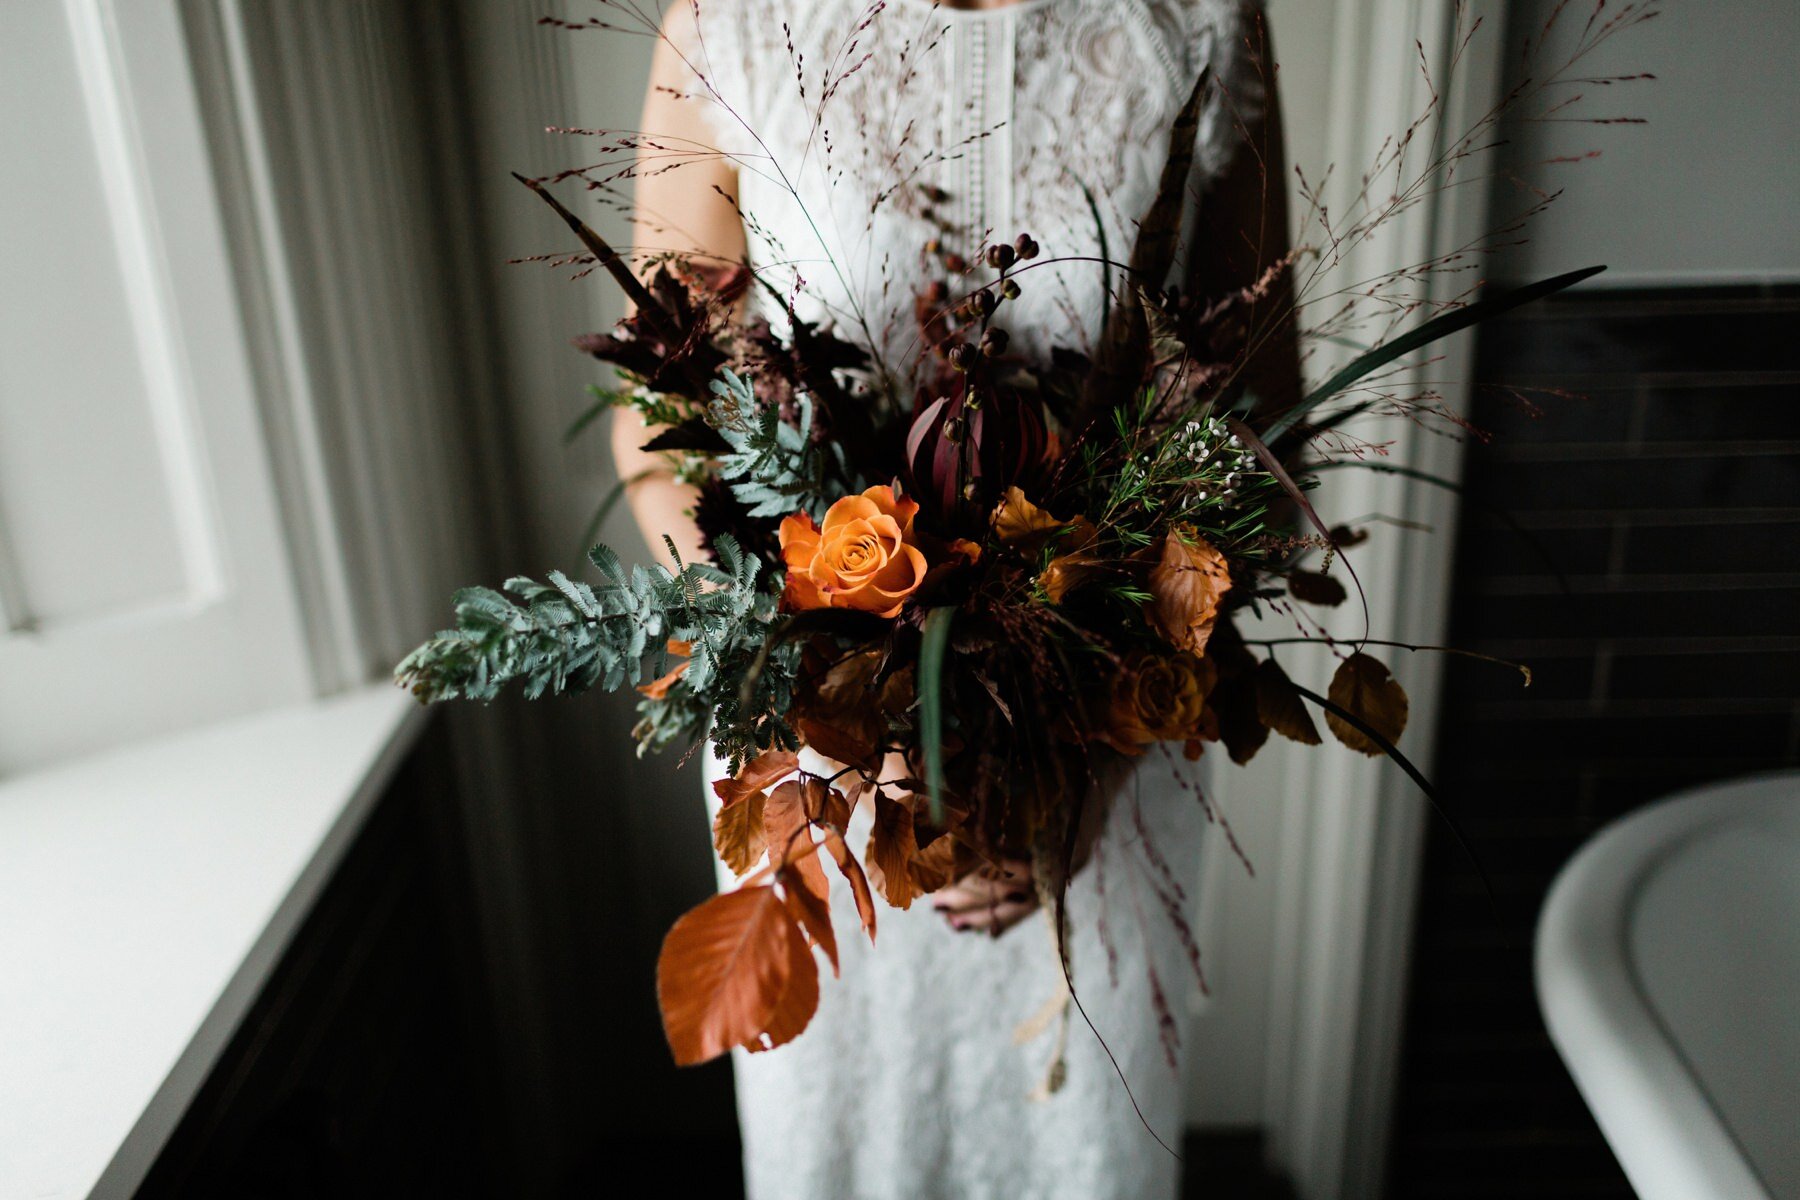 An autumnal, rustic wedding bouquet at Horsley Towers in Surrey.